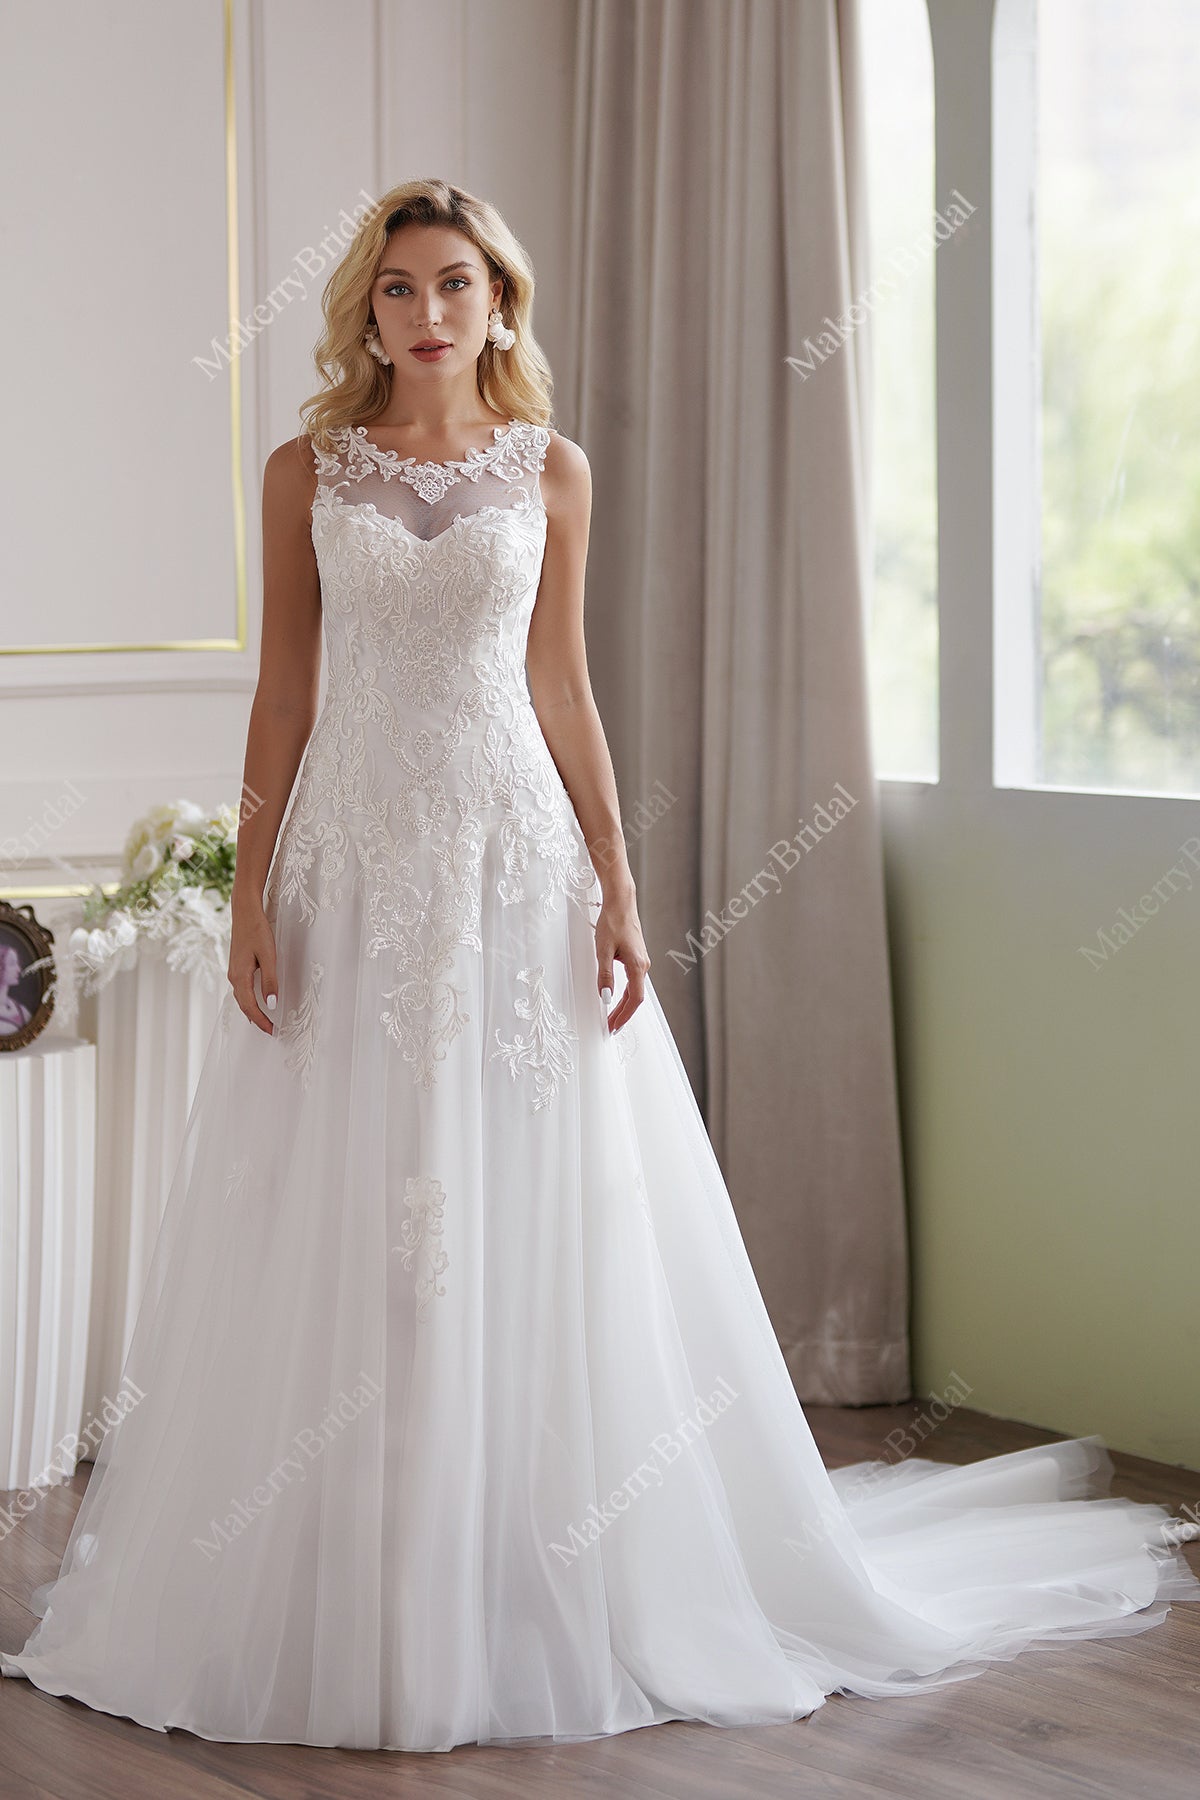 The Soft Tulle A-Line Wedding Dress Has An Illusion Neckline And Sheer Back